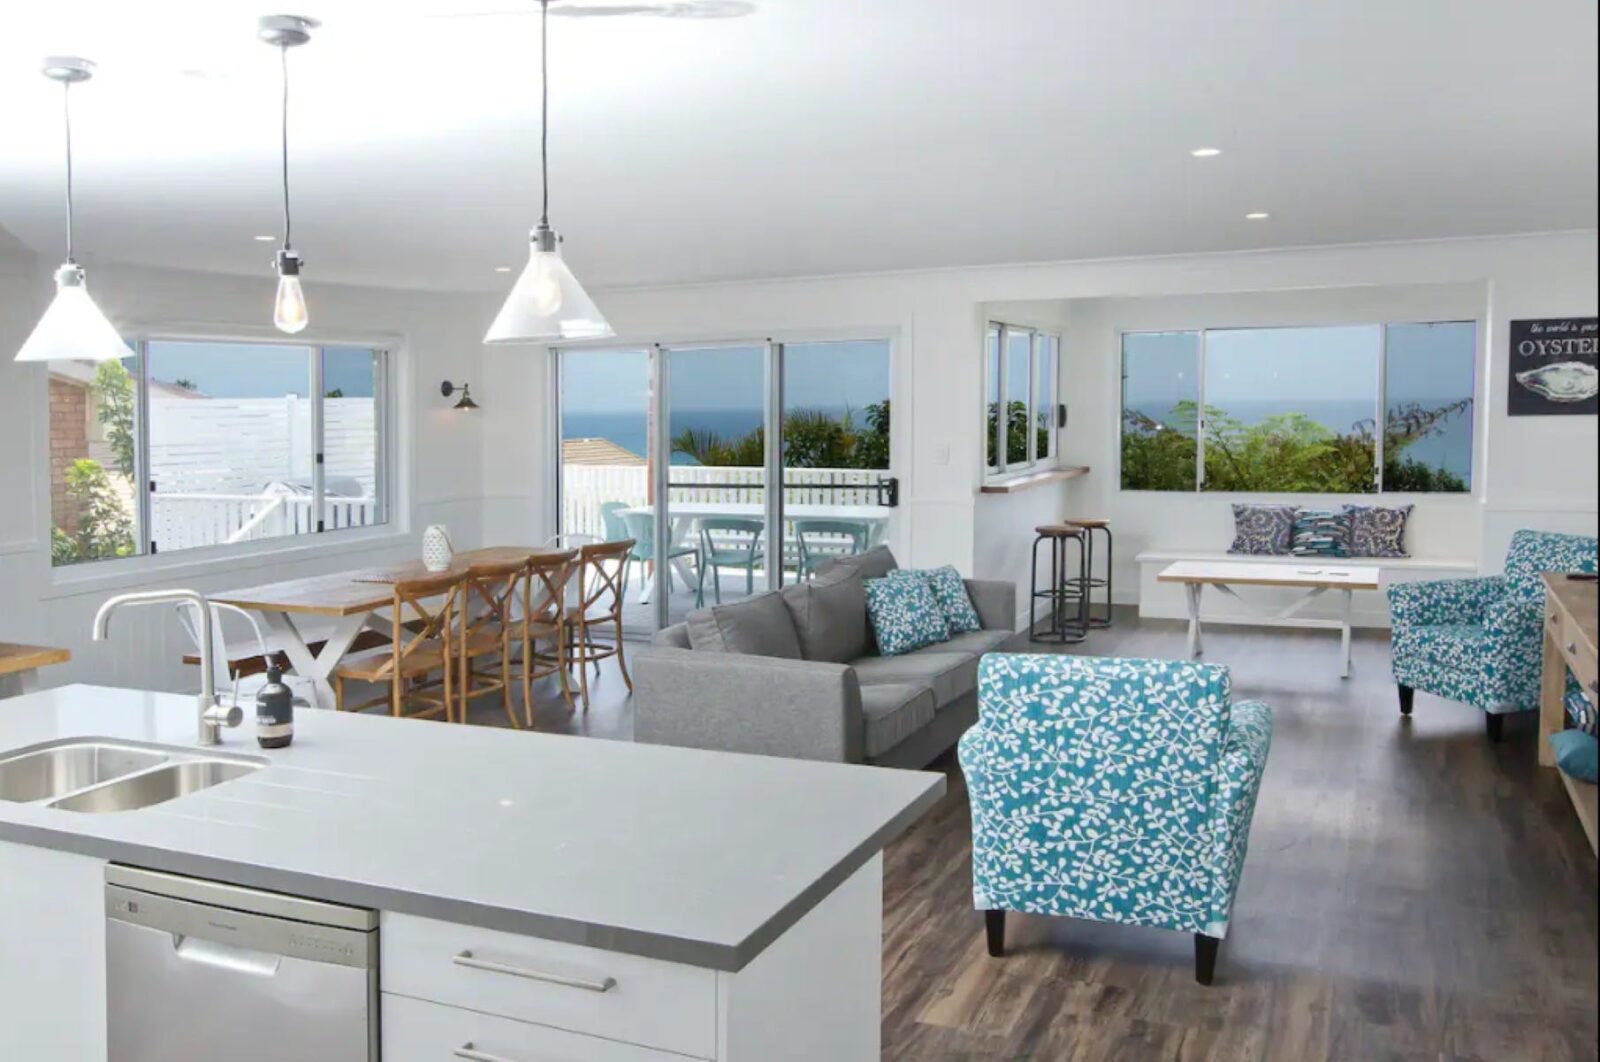 Modern, coastal styled living and dining areas leading on to balcony